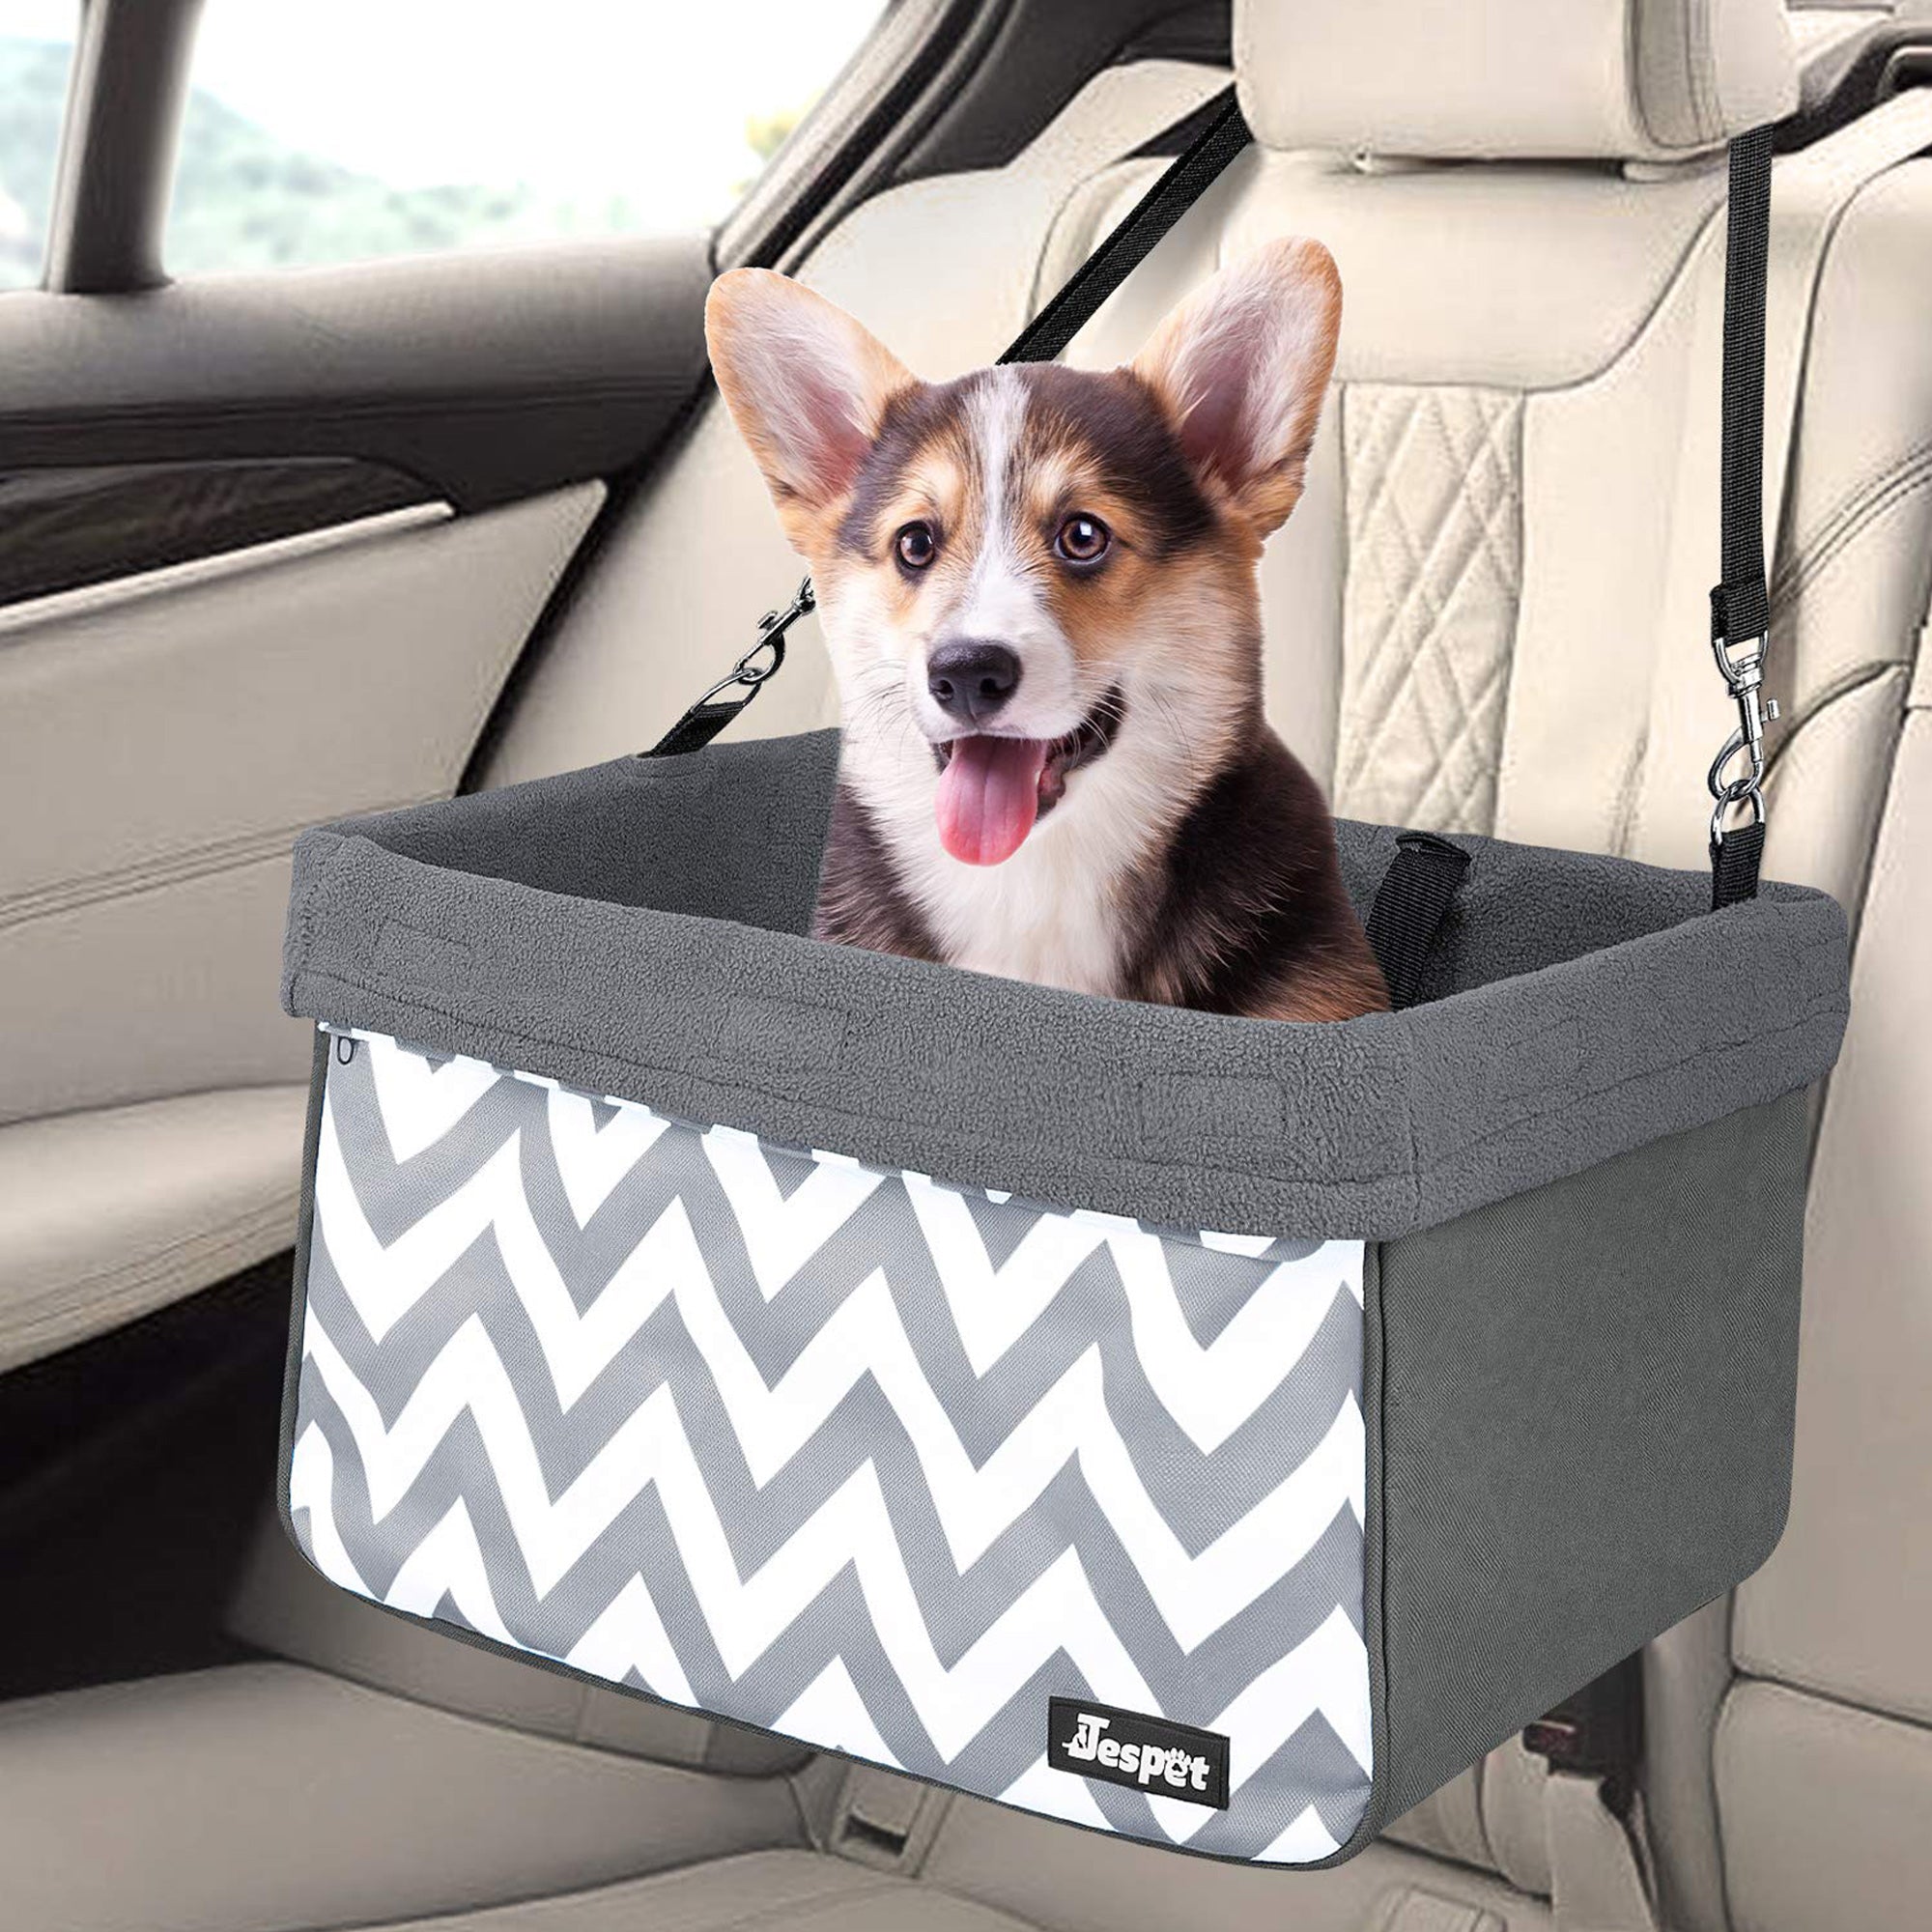 GOOPAWS Deluxe Portable Pet Safety Booster Car Seat, Gray with Strip